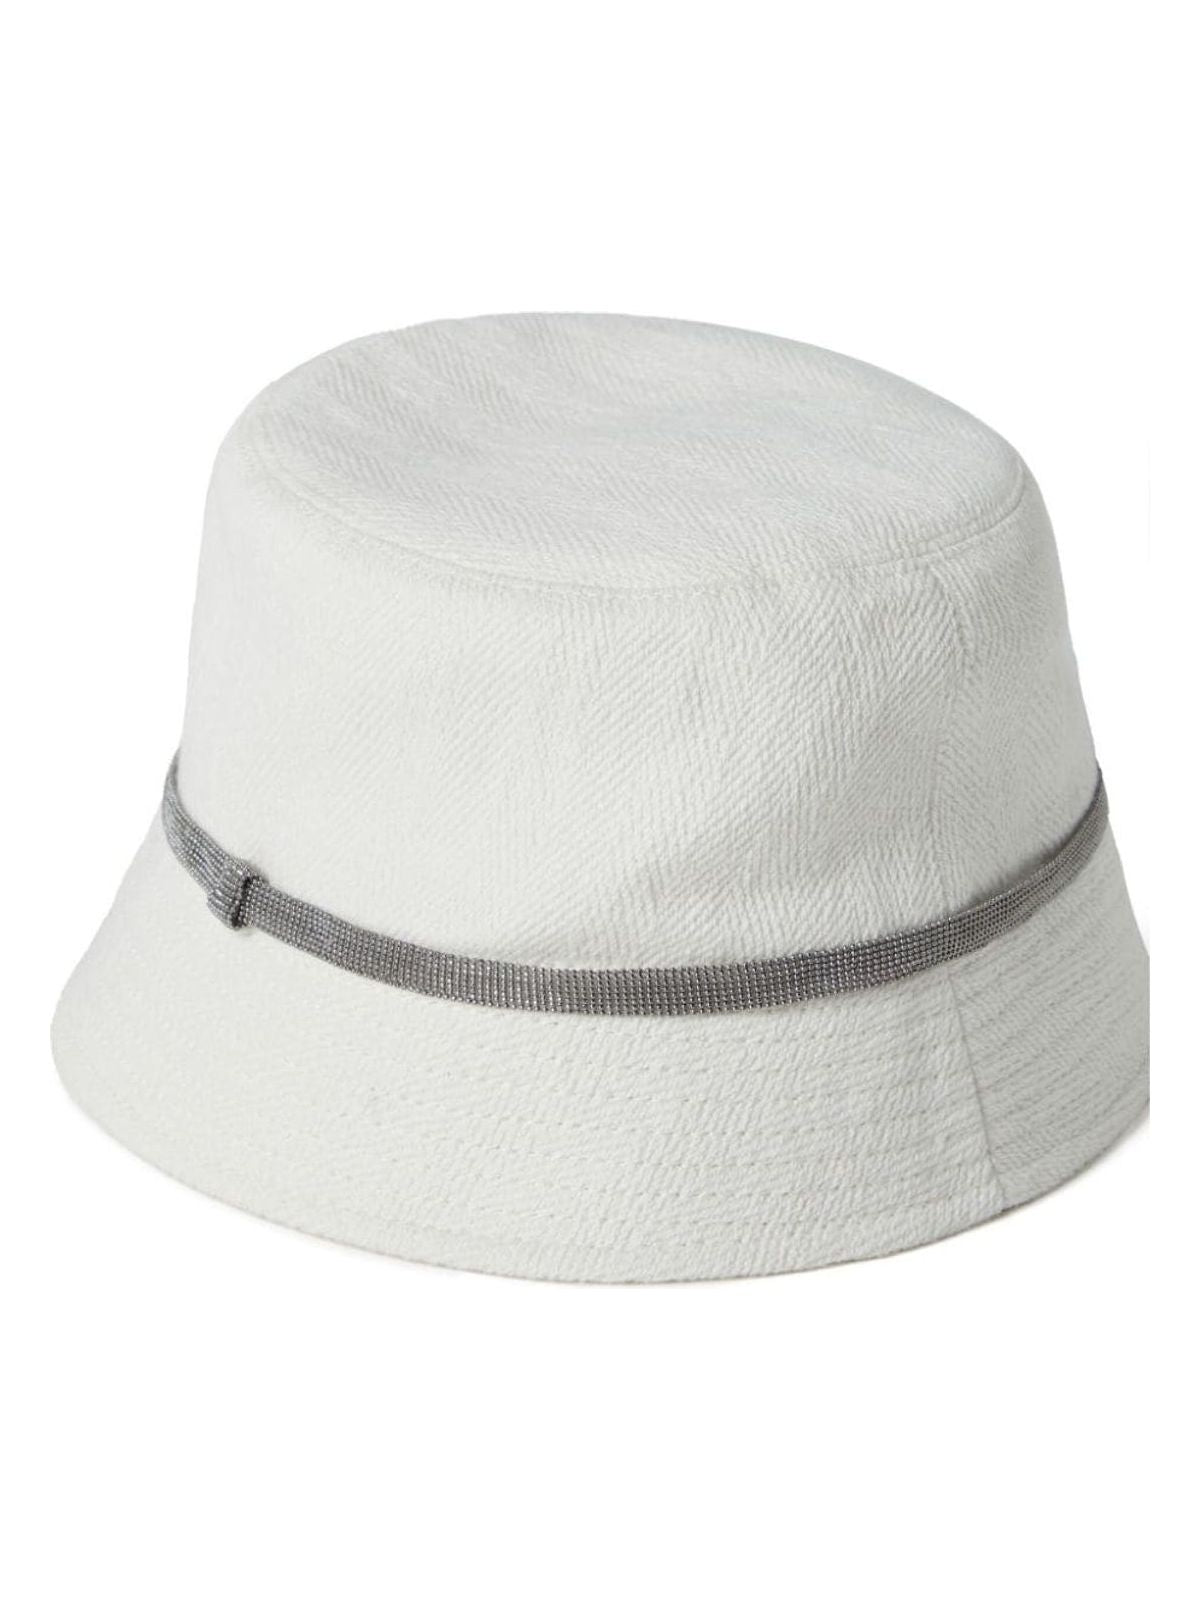 C001 BRUNELLO CUCINELLI LINEN AND COTTON BUCKET HAT WITH SHINY DETAILS